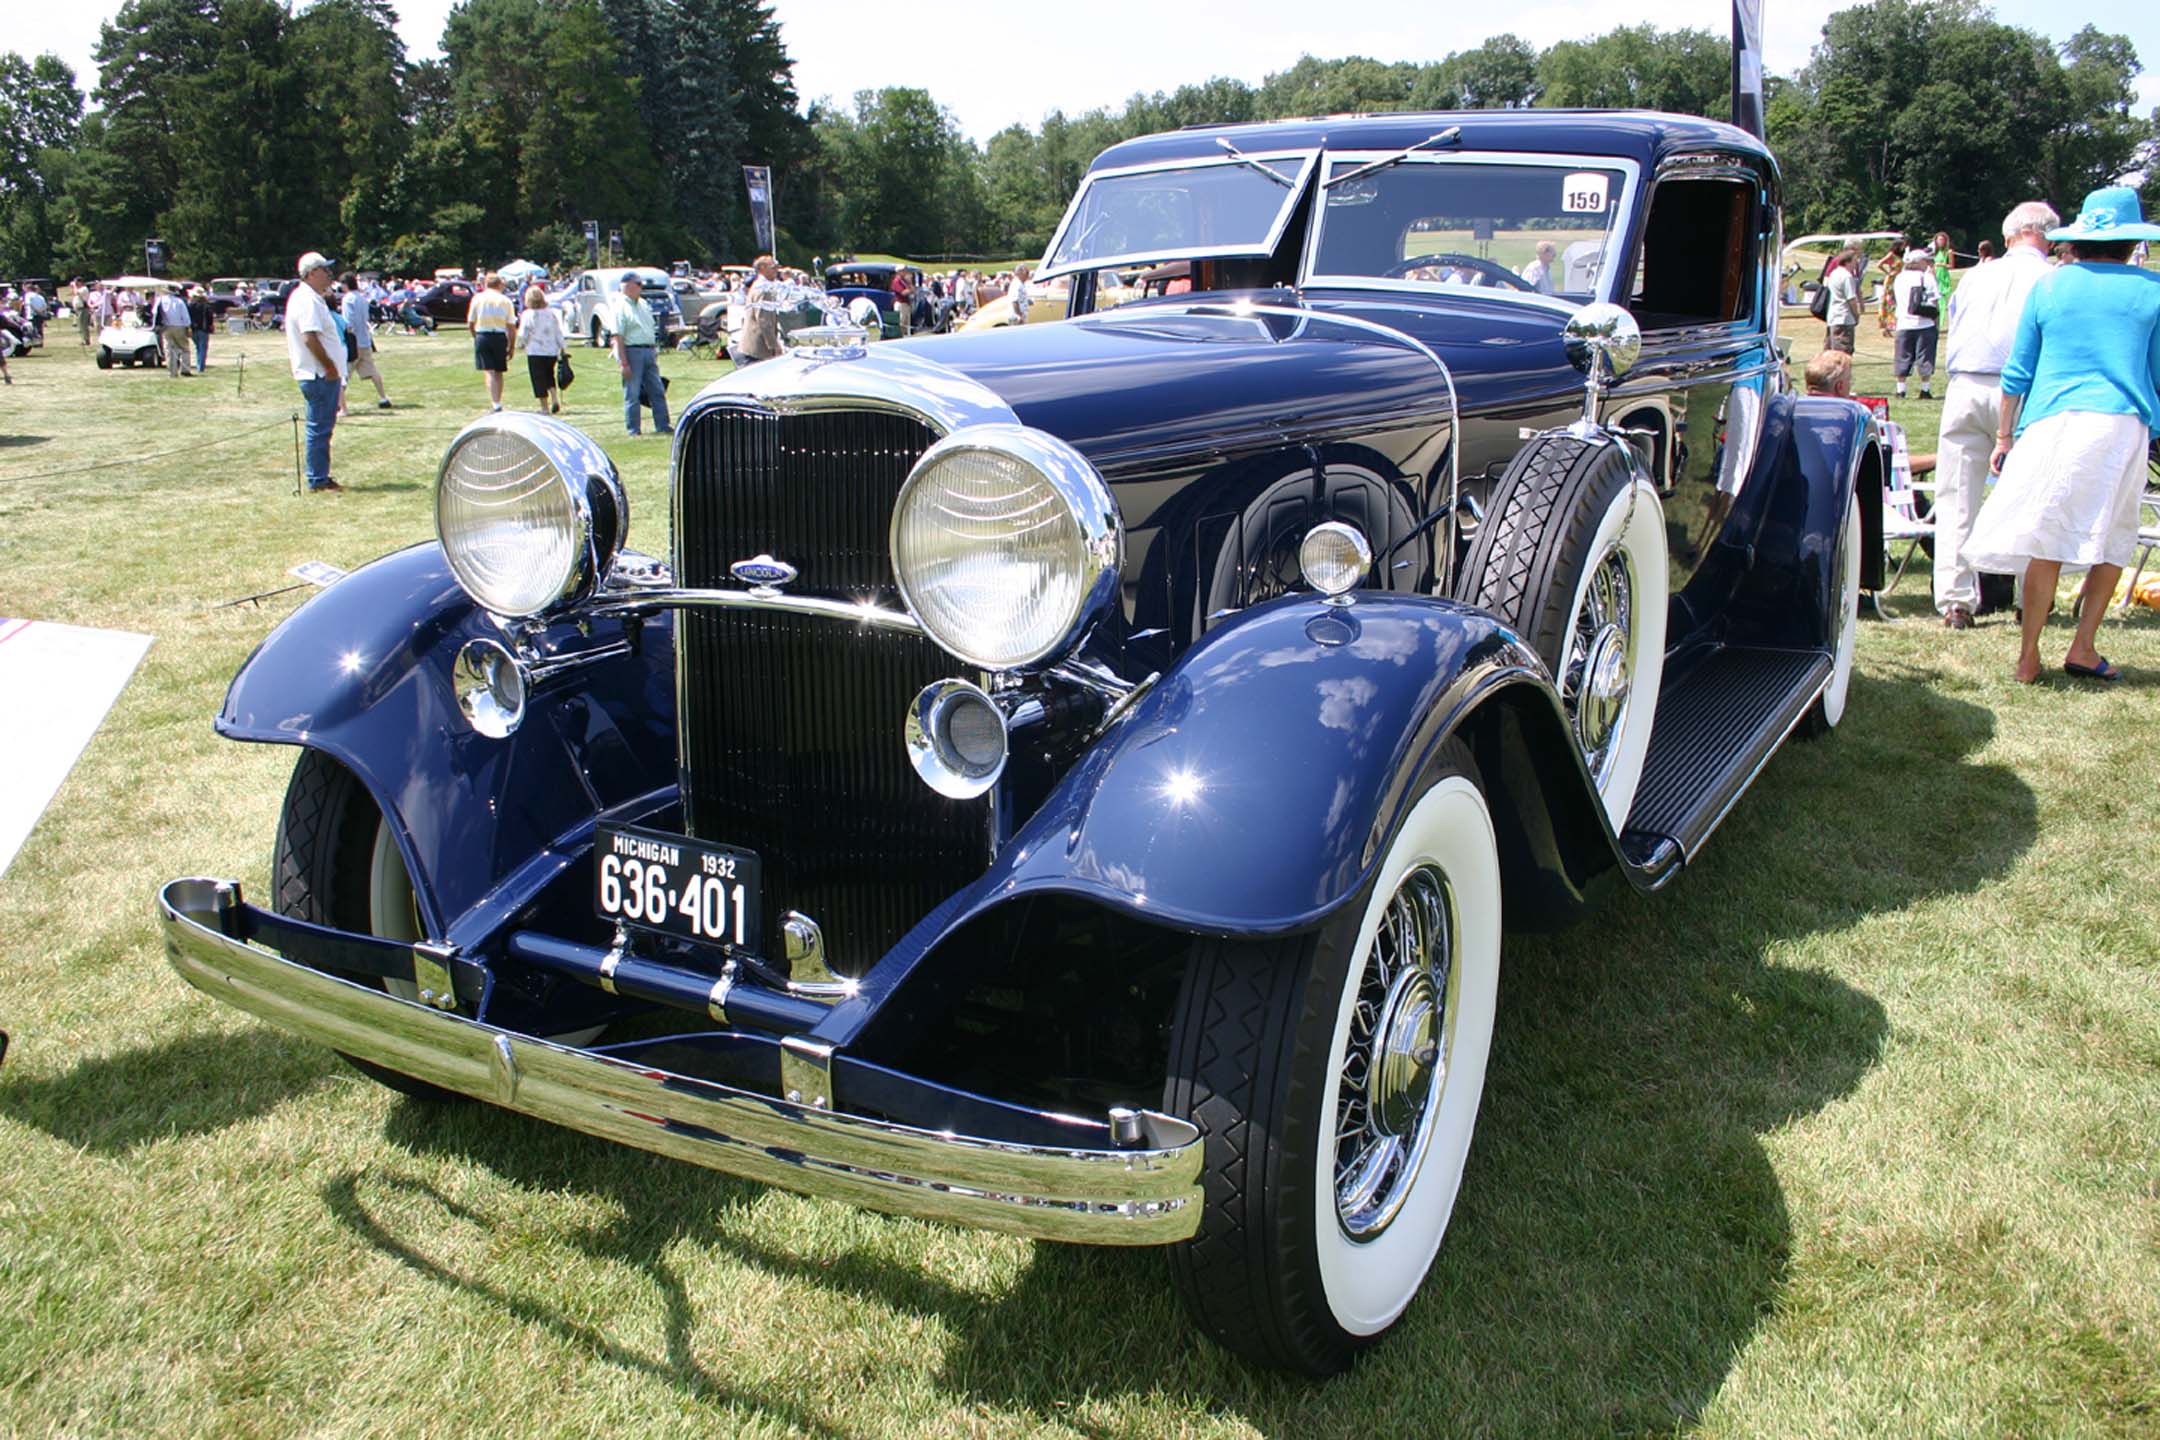 Who Was the Buick Motor Company Named After and How Did the Buick Get Its Name?